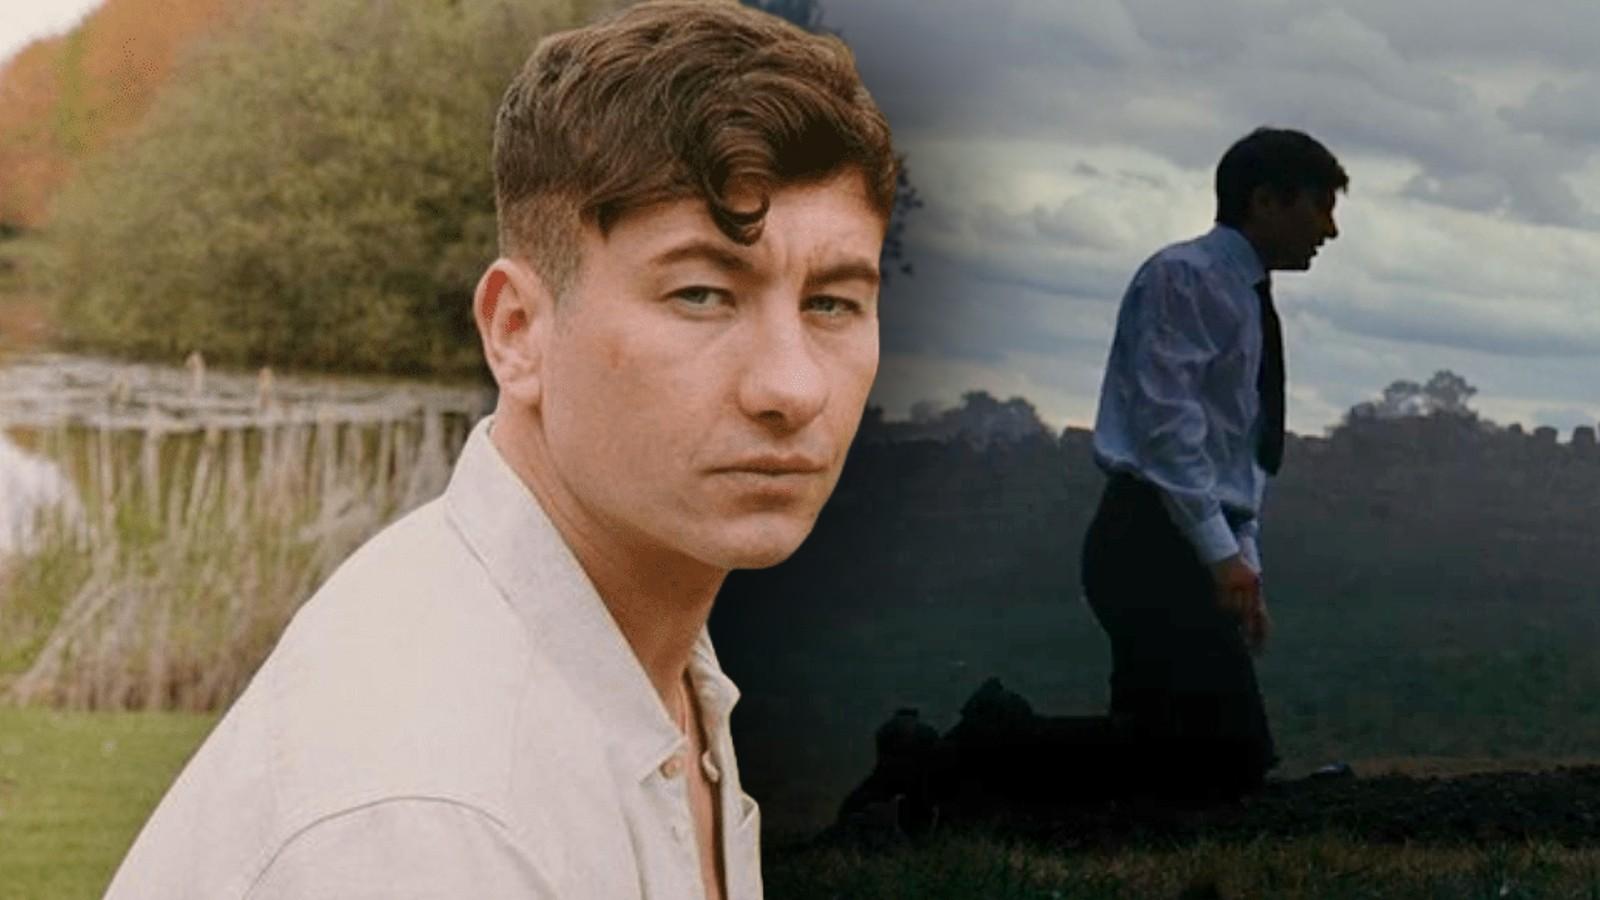 Barry Keoghan in Saltburn and the grave scene